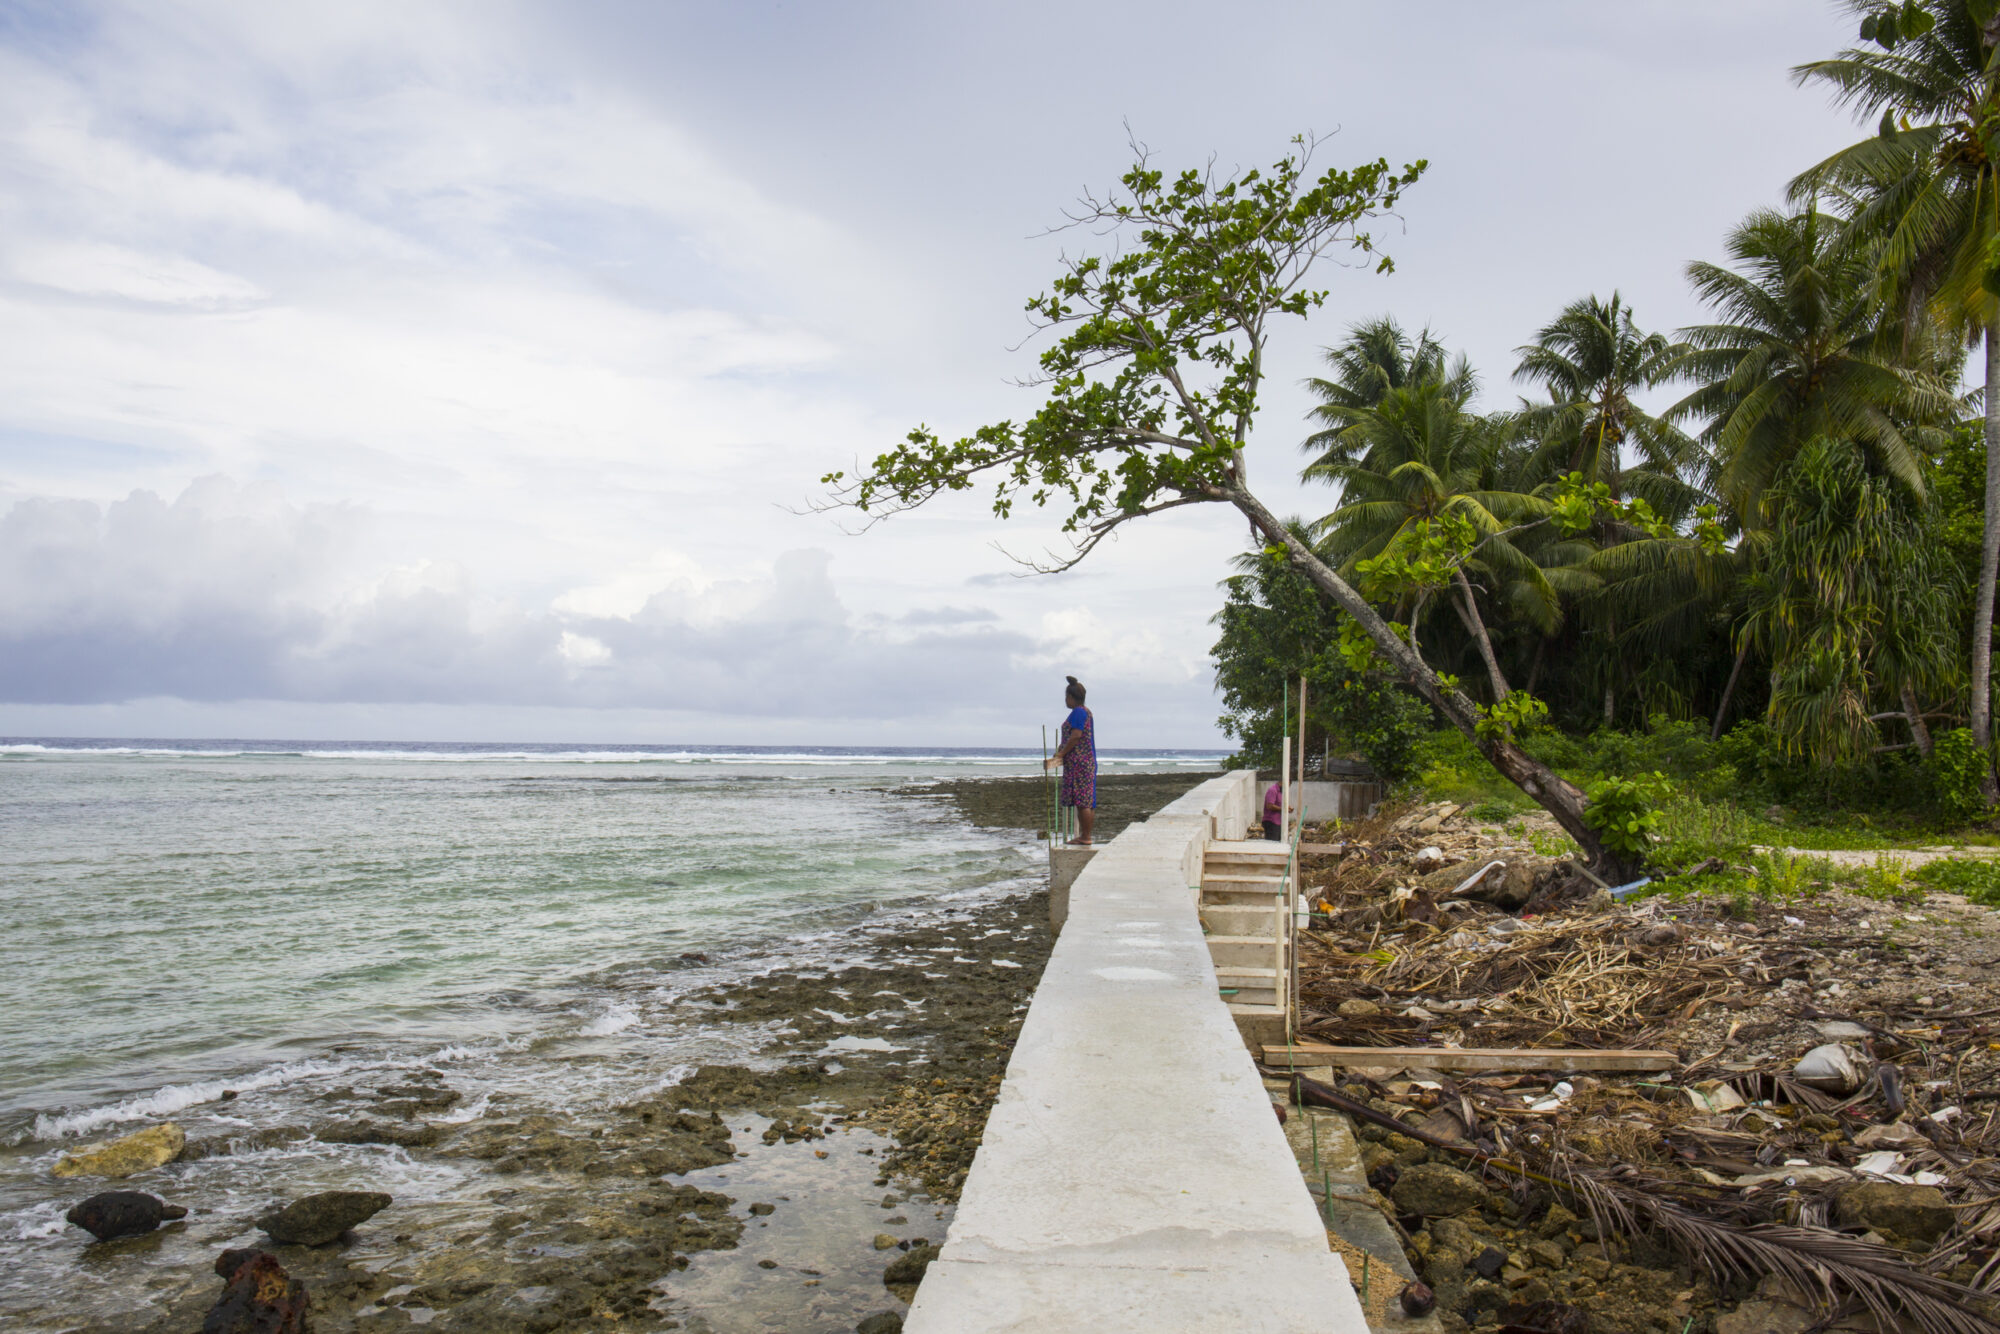 A concrete seawall down the centre of the image, with the ocean to the left and tropical palm trees to the right. A person stands on the seawall, looking out at the sea. Behind the wall is some debris.